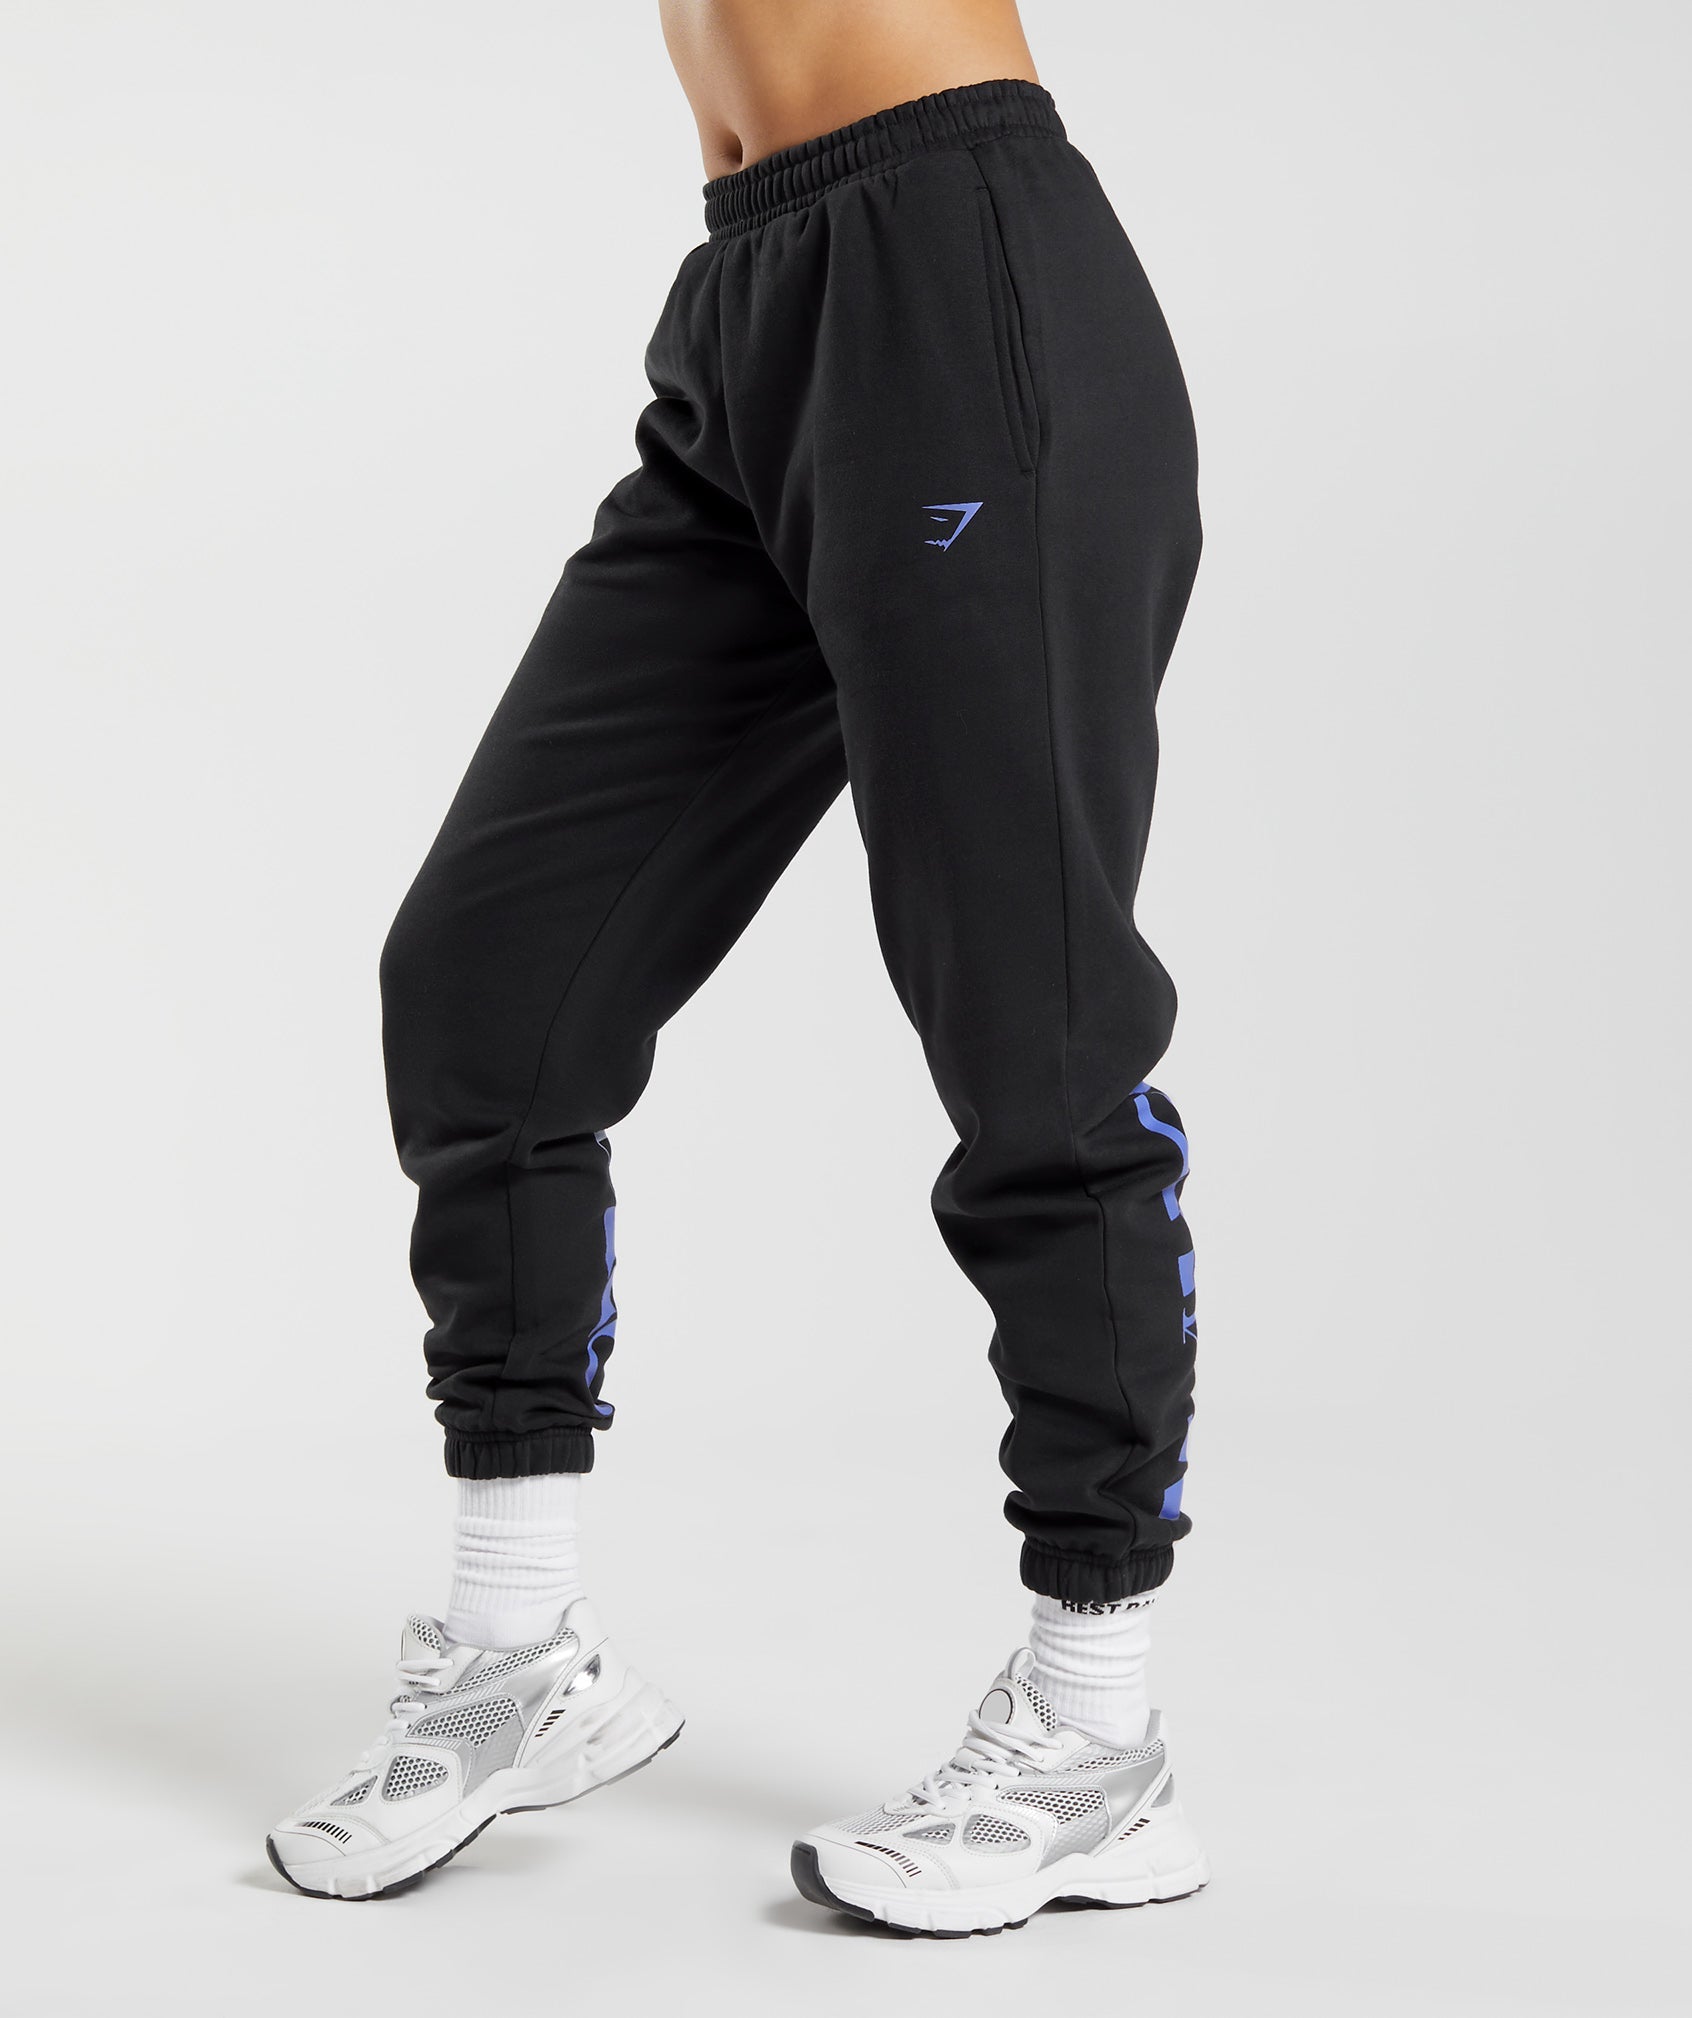 Maxed Out Joggers in Black - view 3